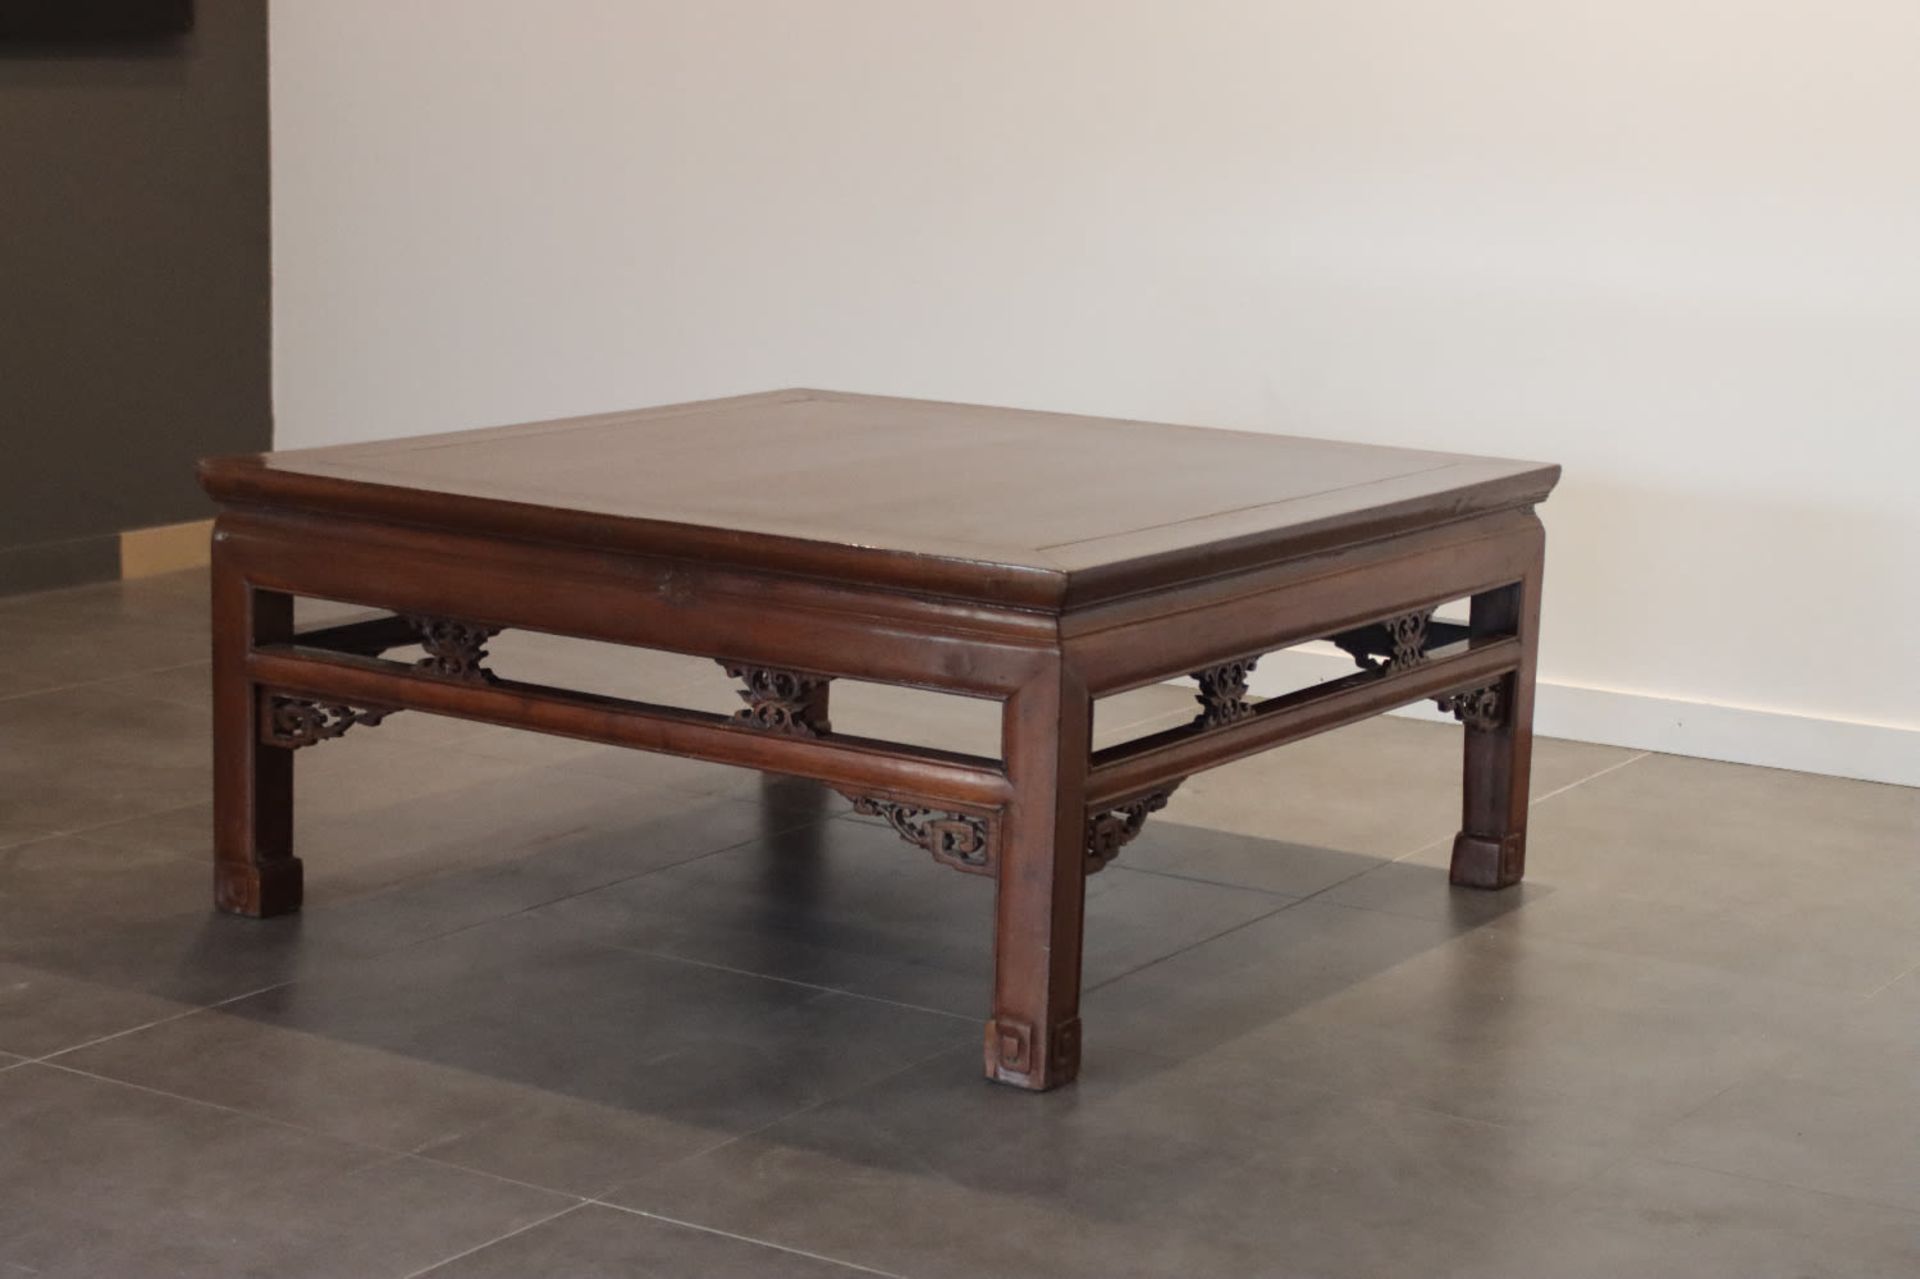 A Chinese square low table, 20th Century - Image 3 of 3